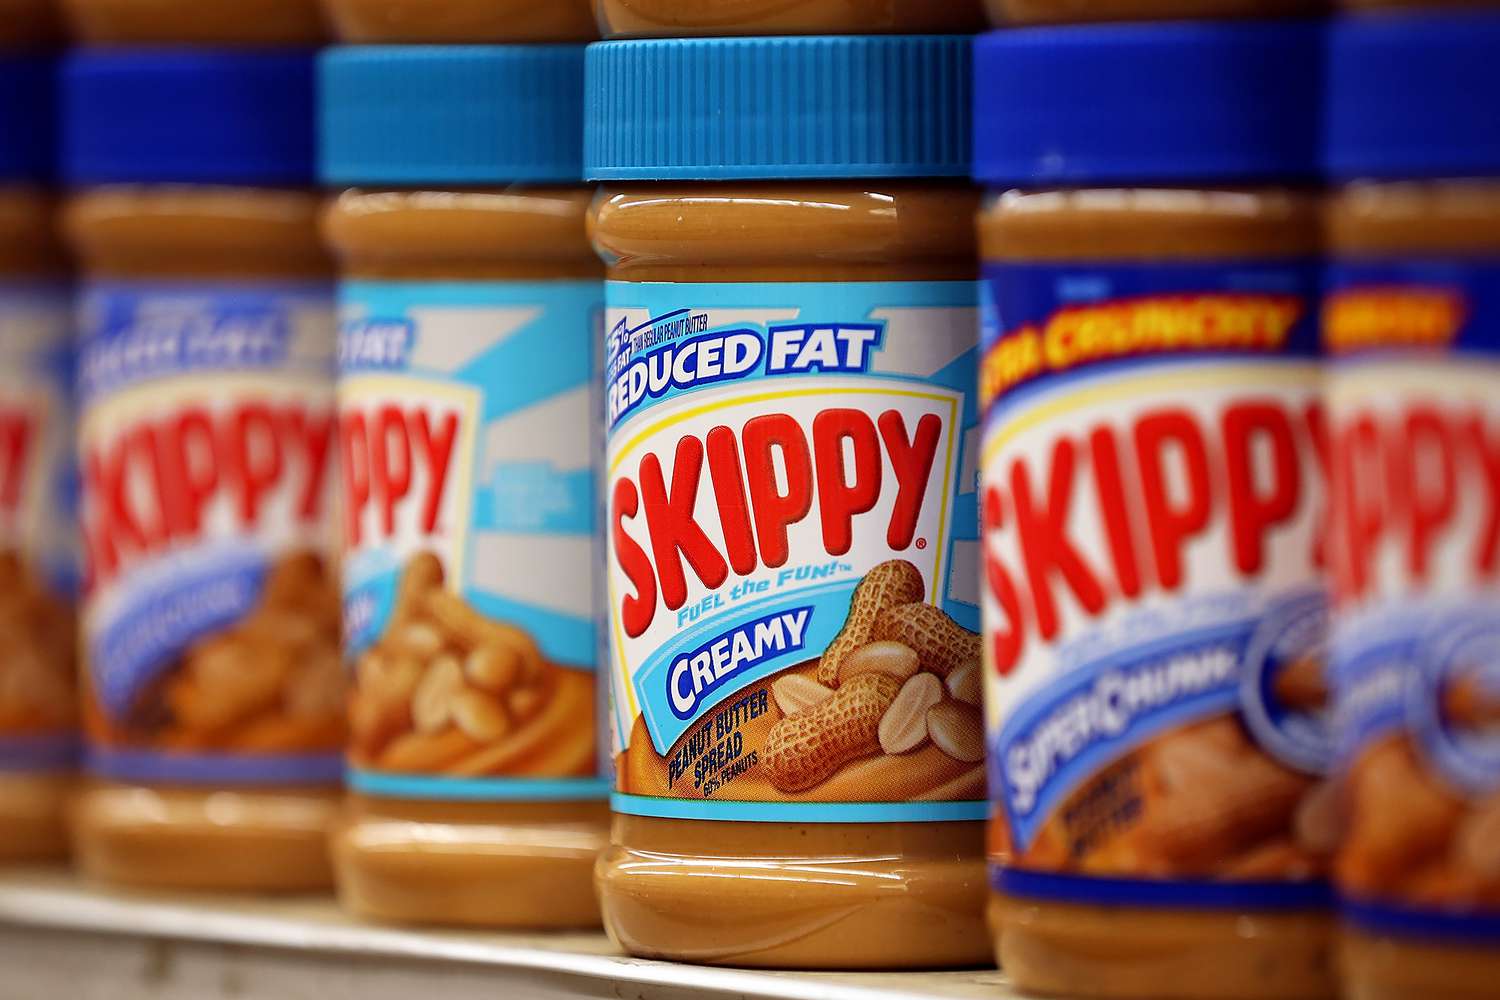 20-crunchy-facts-about-skippy-peanut-butter